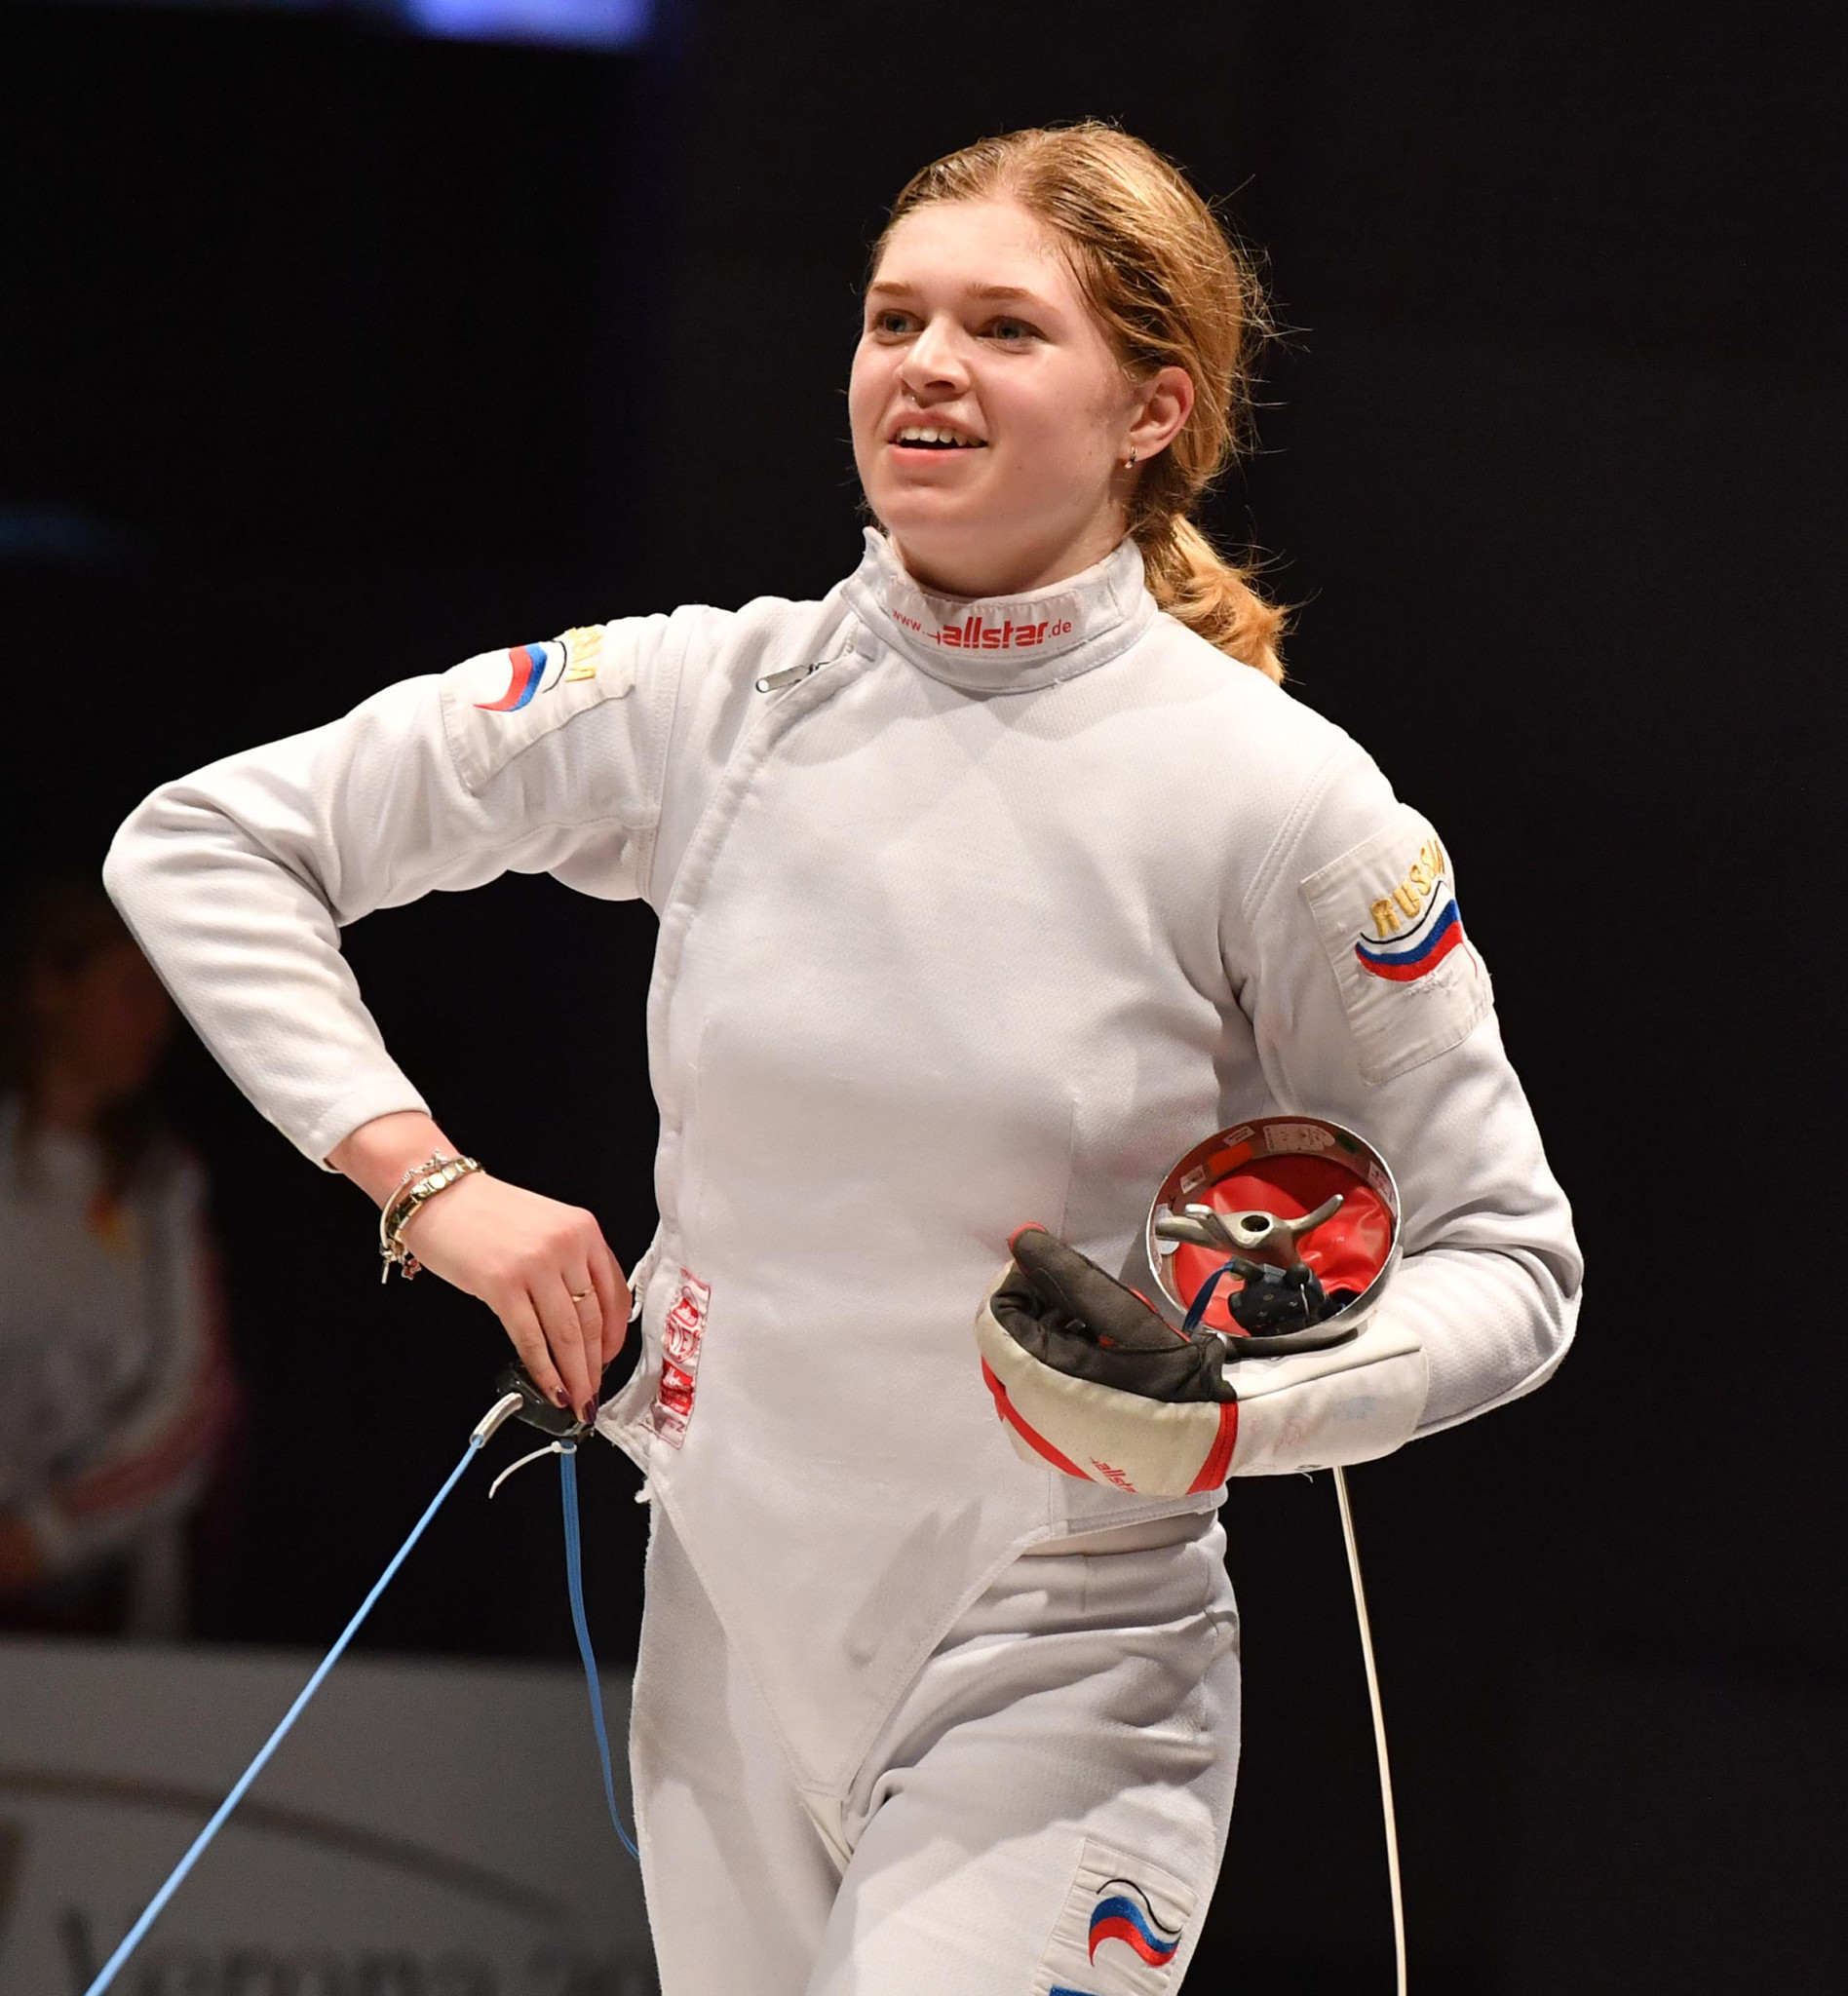 Russia's Anastasia Soldatova won the women’s under-20 épée title at the FIE Junior and Cadets World Championships in Verona with victory over Poland's Julia Falinksa in the final ©FIE